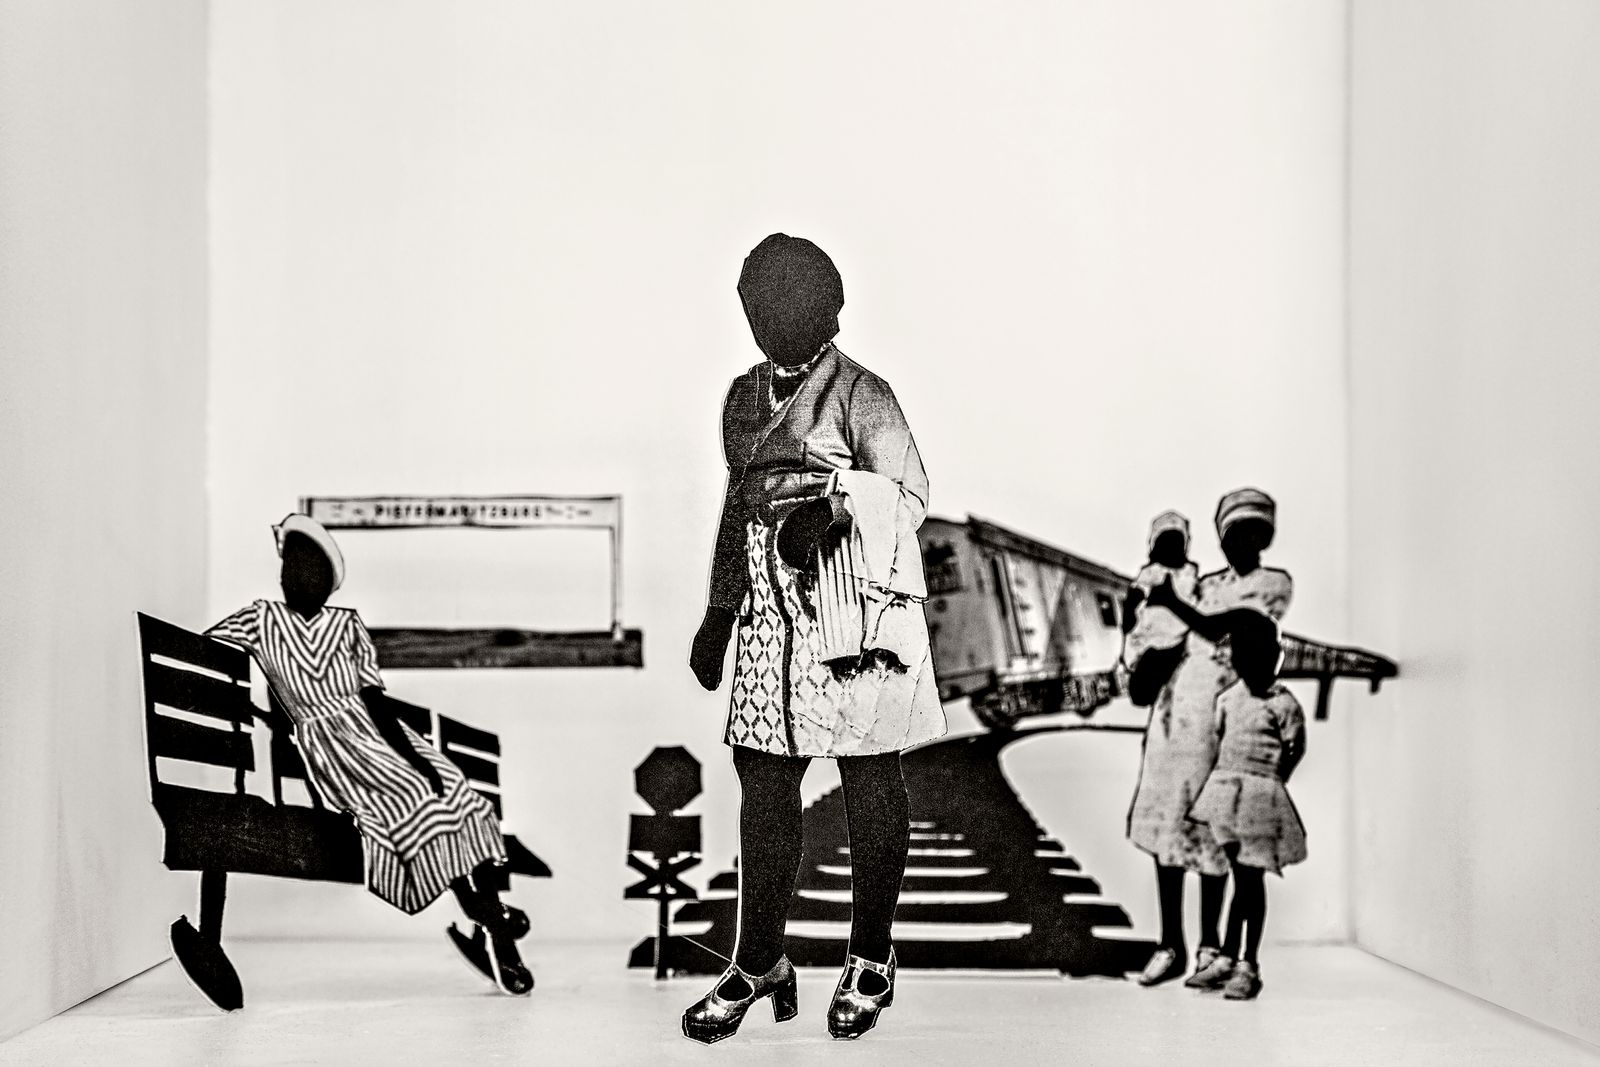 © Lebohang Kganye - You couldn’t stop the train in time, 2018